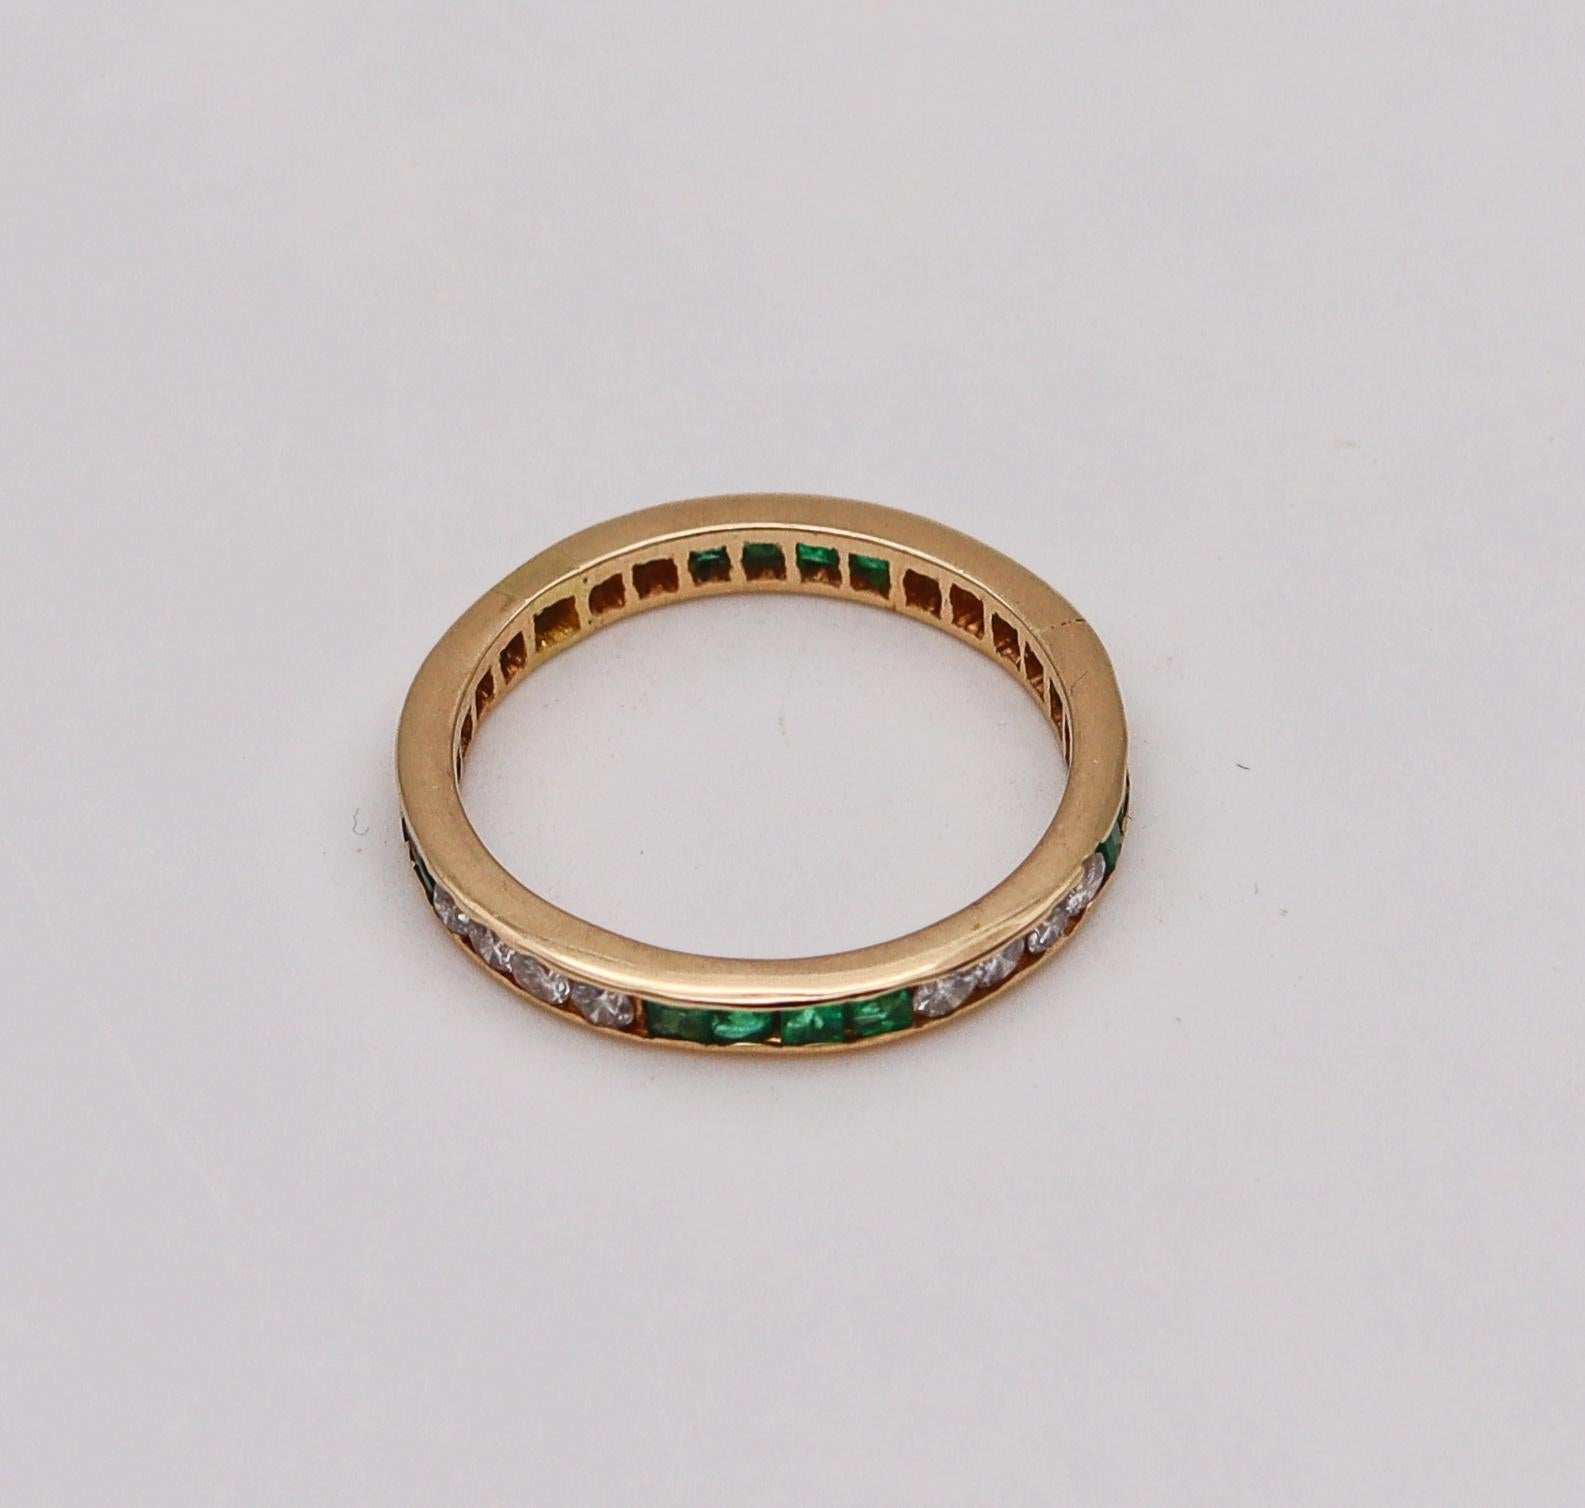 Contemporary Eternity Ring Band in 18kt Yellow Gold with 1.28 Ctw in Diamonds and Emeralds